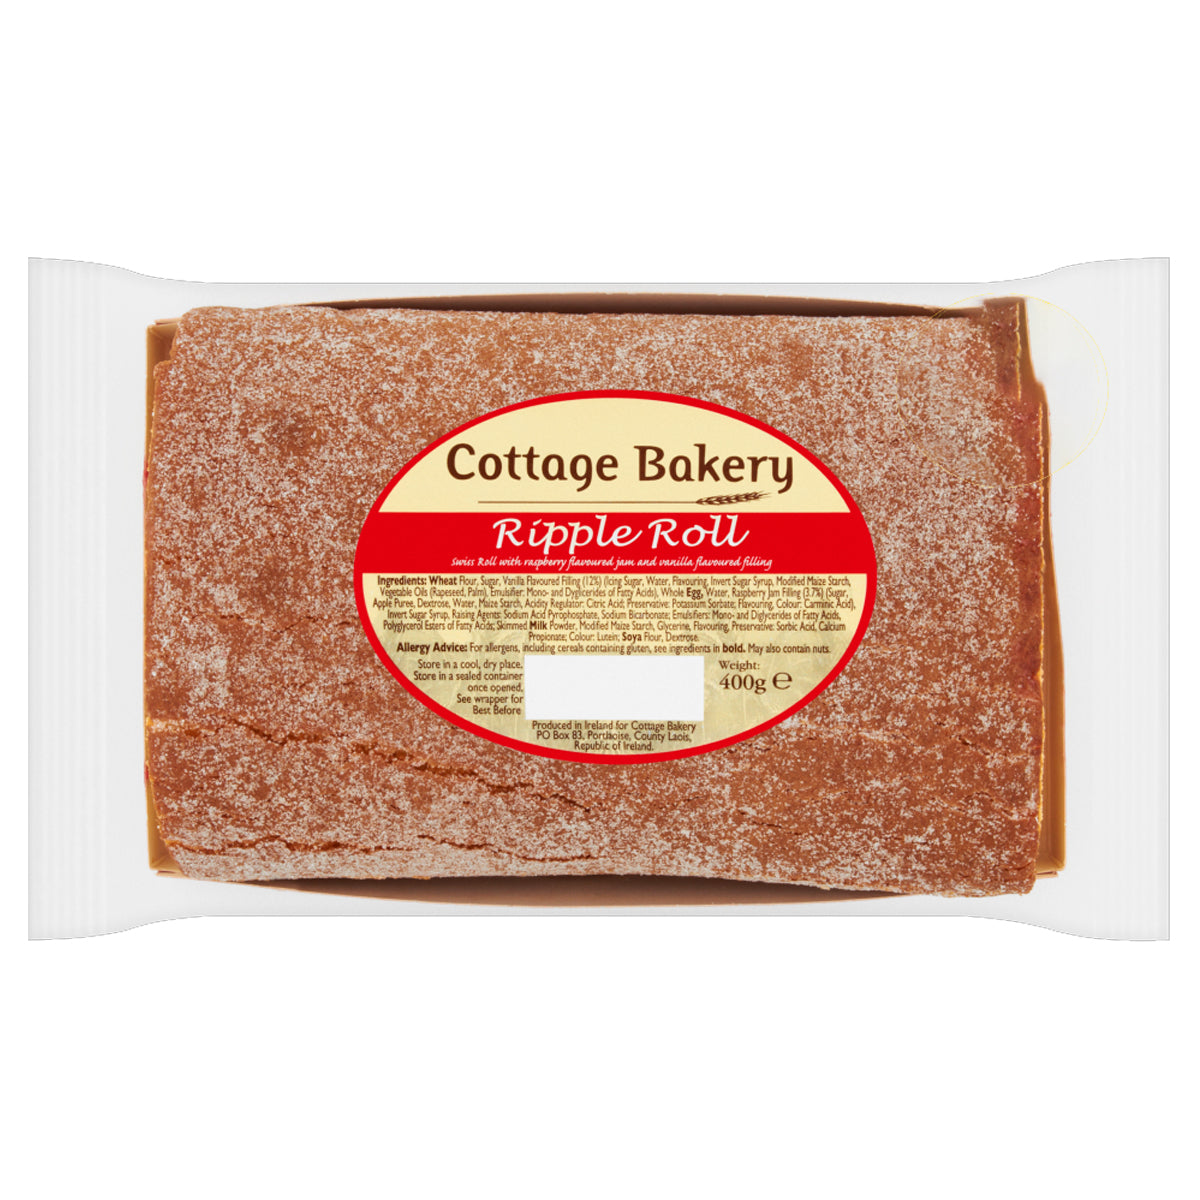 Cottage Bakery - Ripple Roll - 400g.